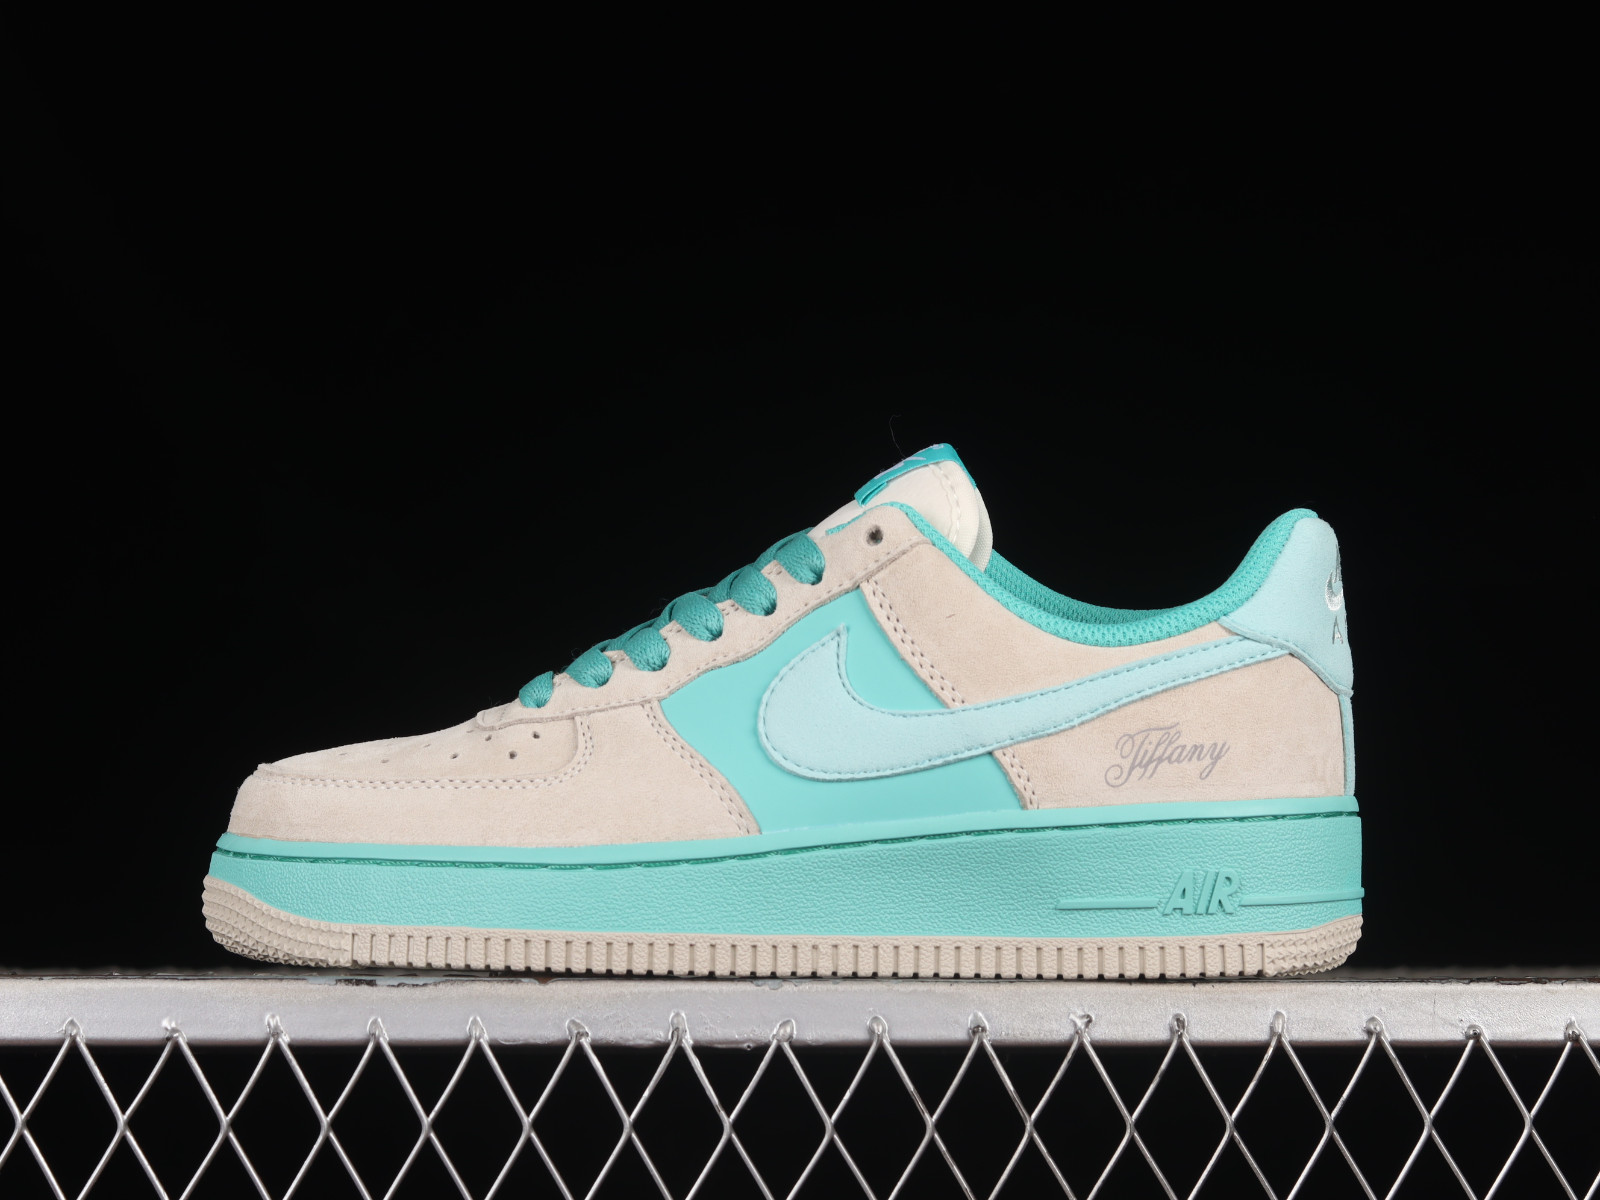 Nike Airforce 1 X Tiffany Grey Blue Men'S Sneakers Shoes